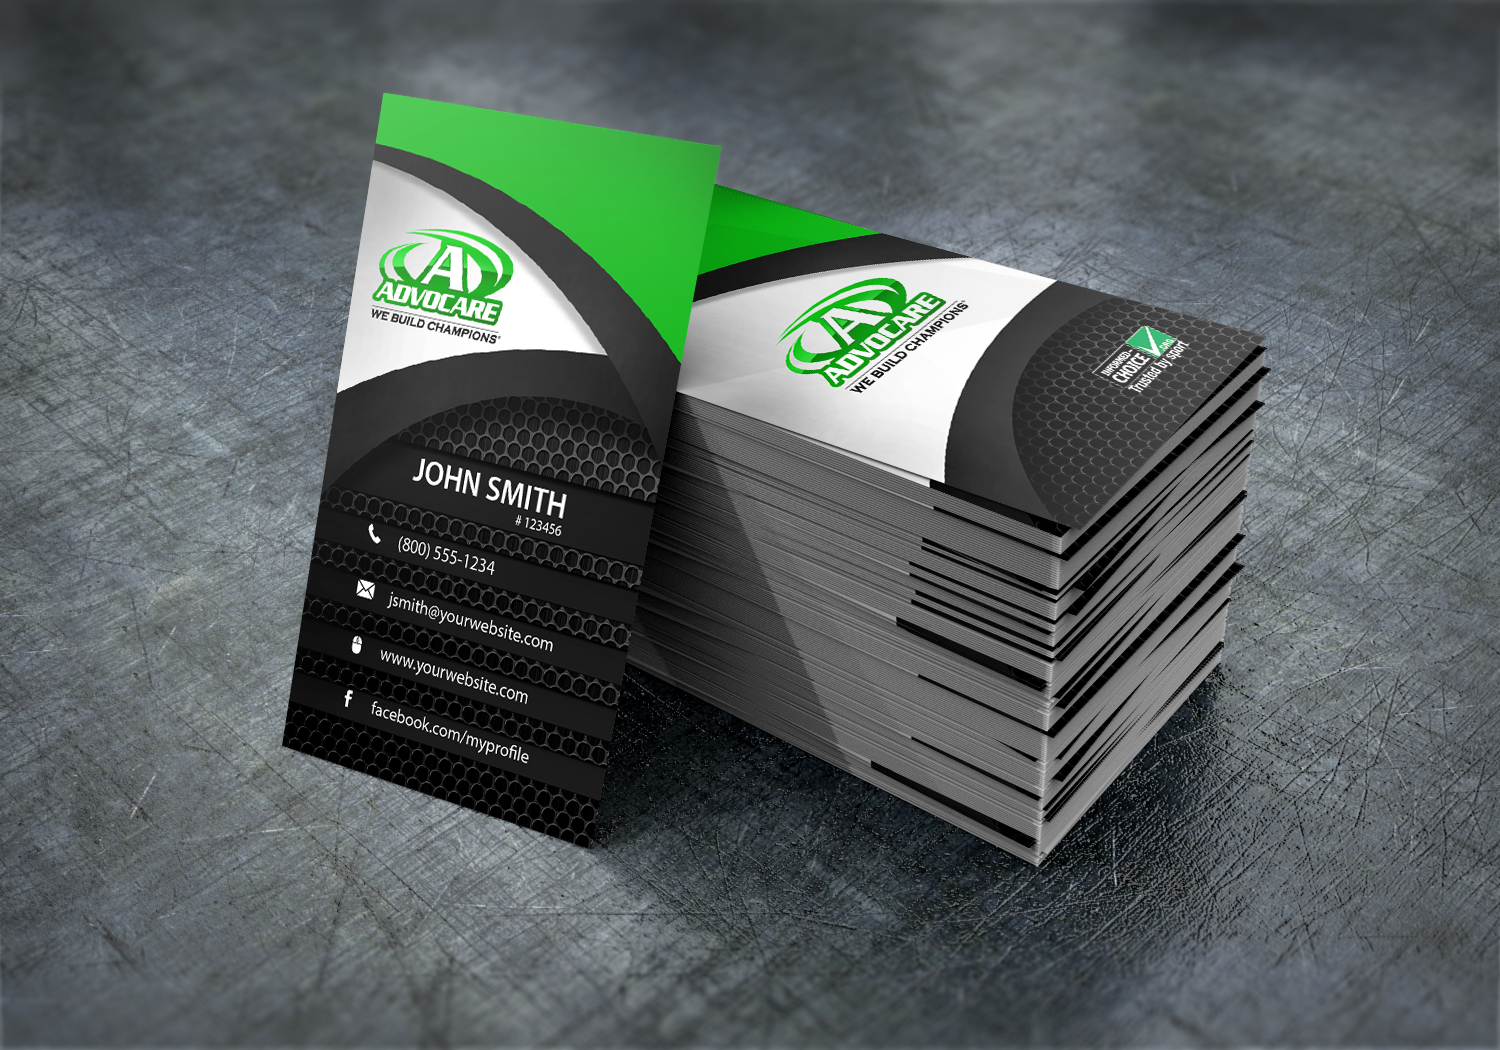 New Cards Are Here For Advocare Distributors! #mlm #advocare With Advocare Business Card Template